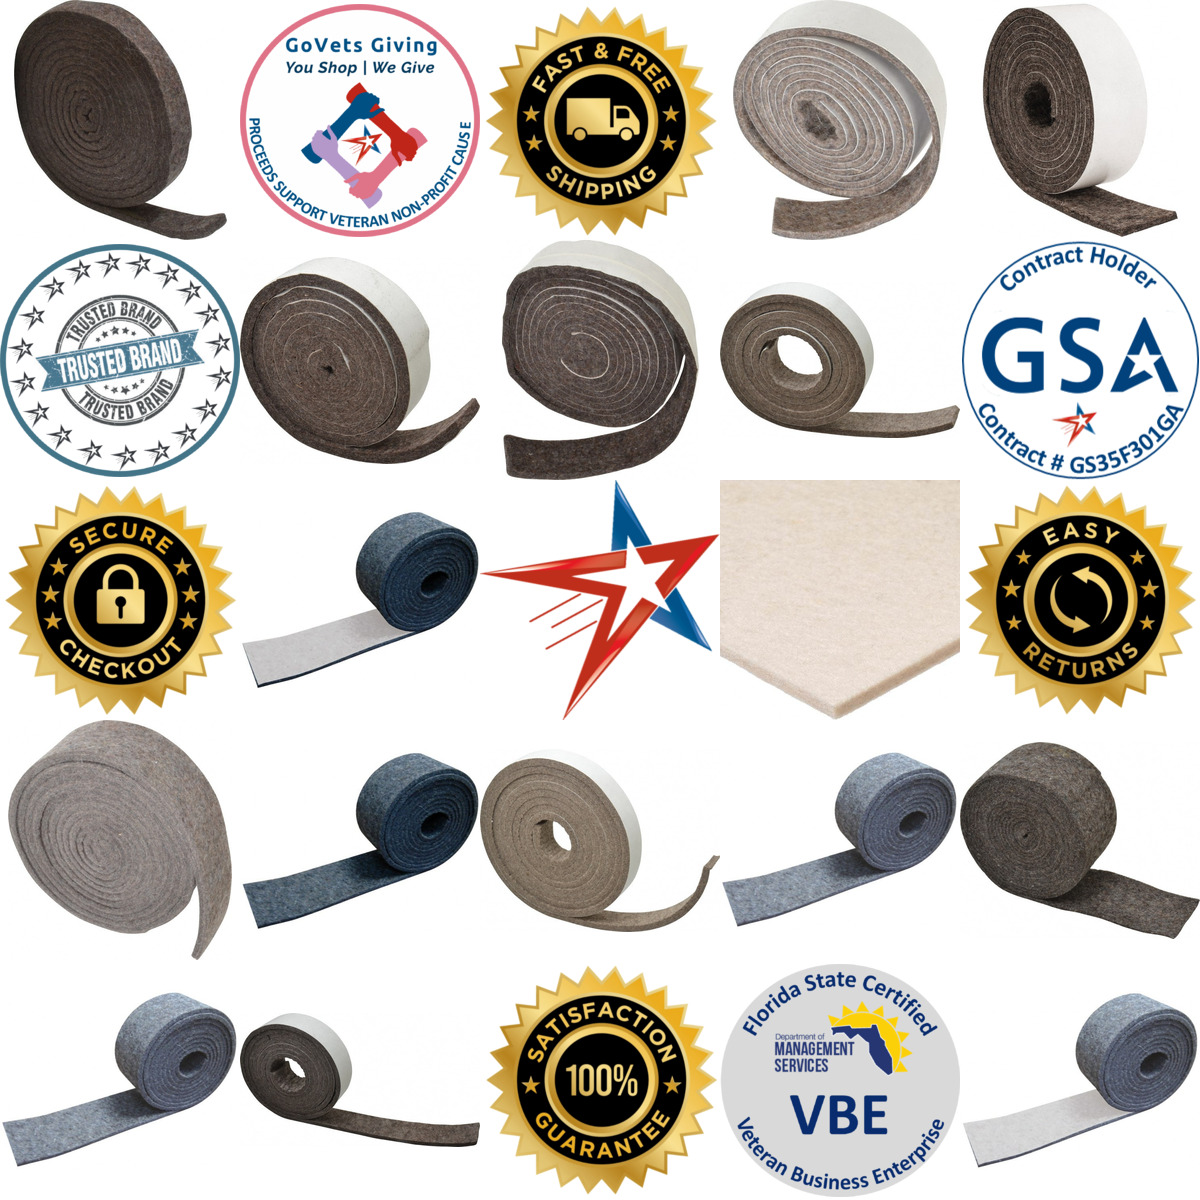 A selection of Felt Stripping products on GoVets